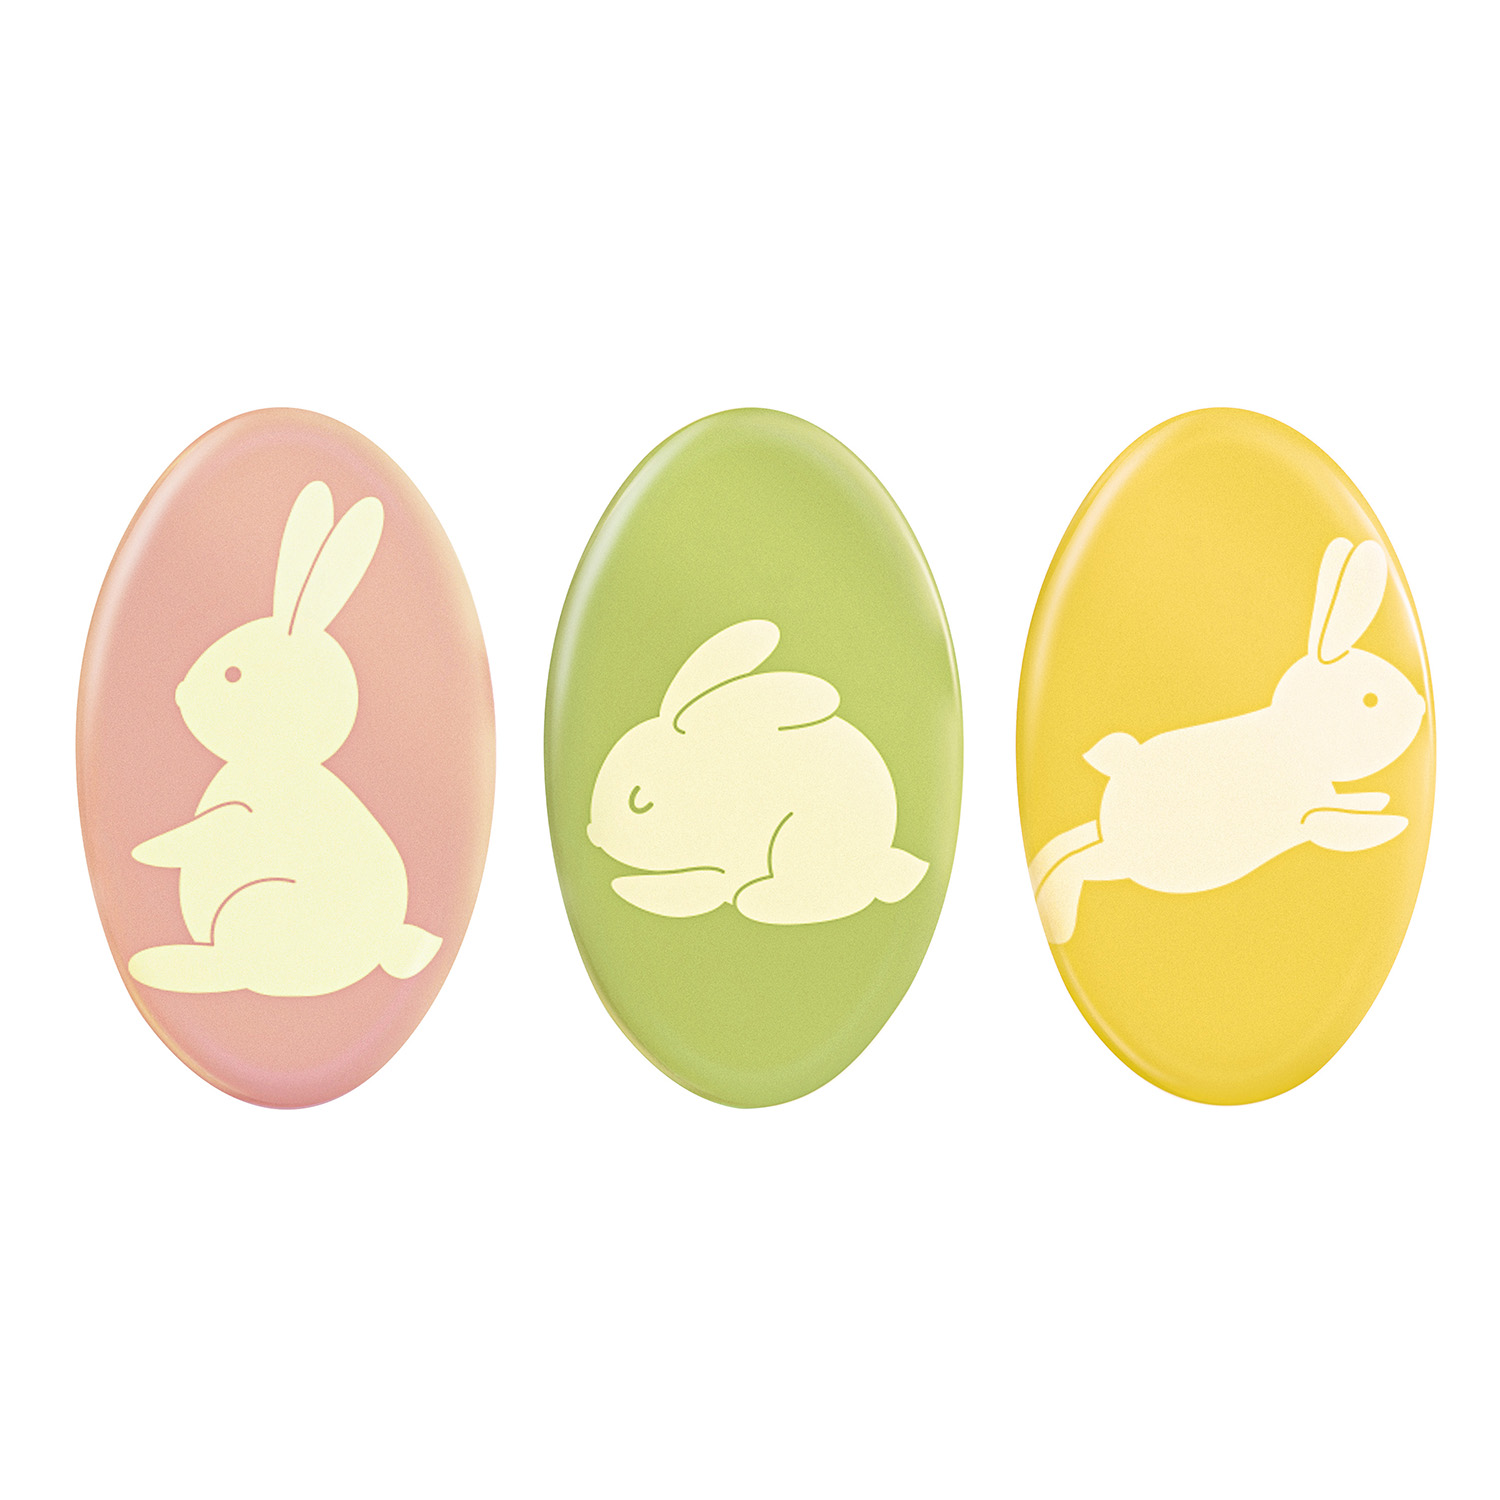 COLORFUL BUNNIES